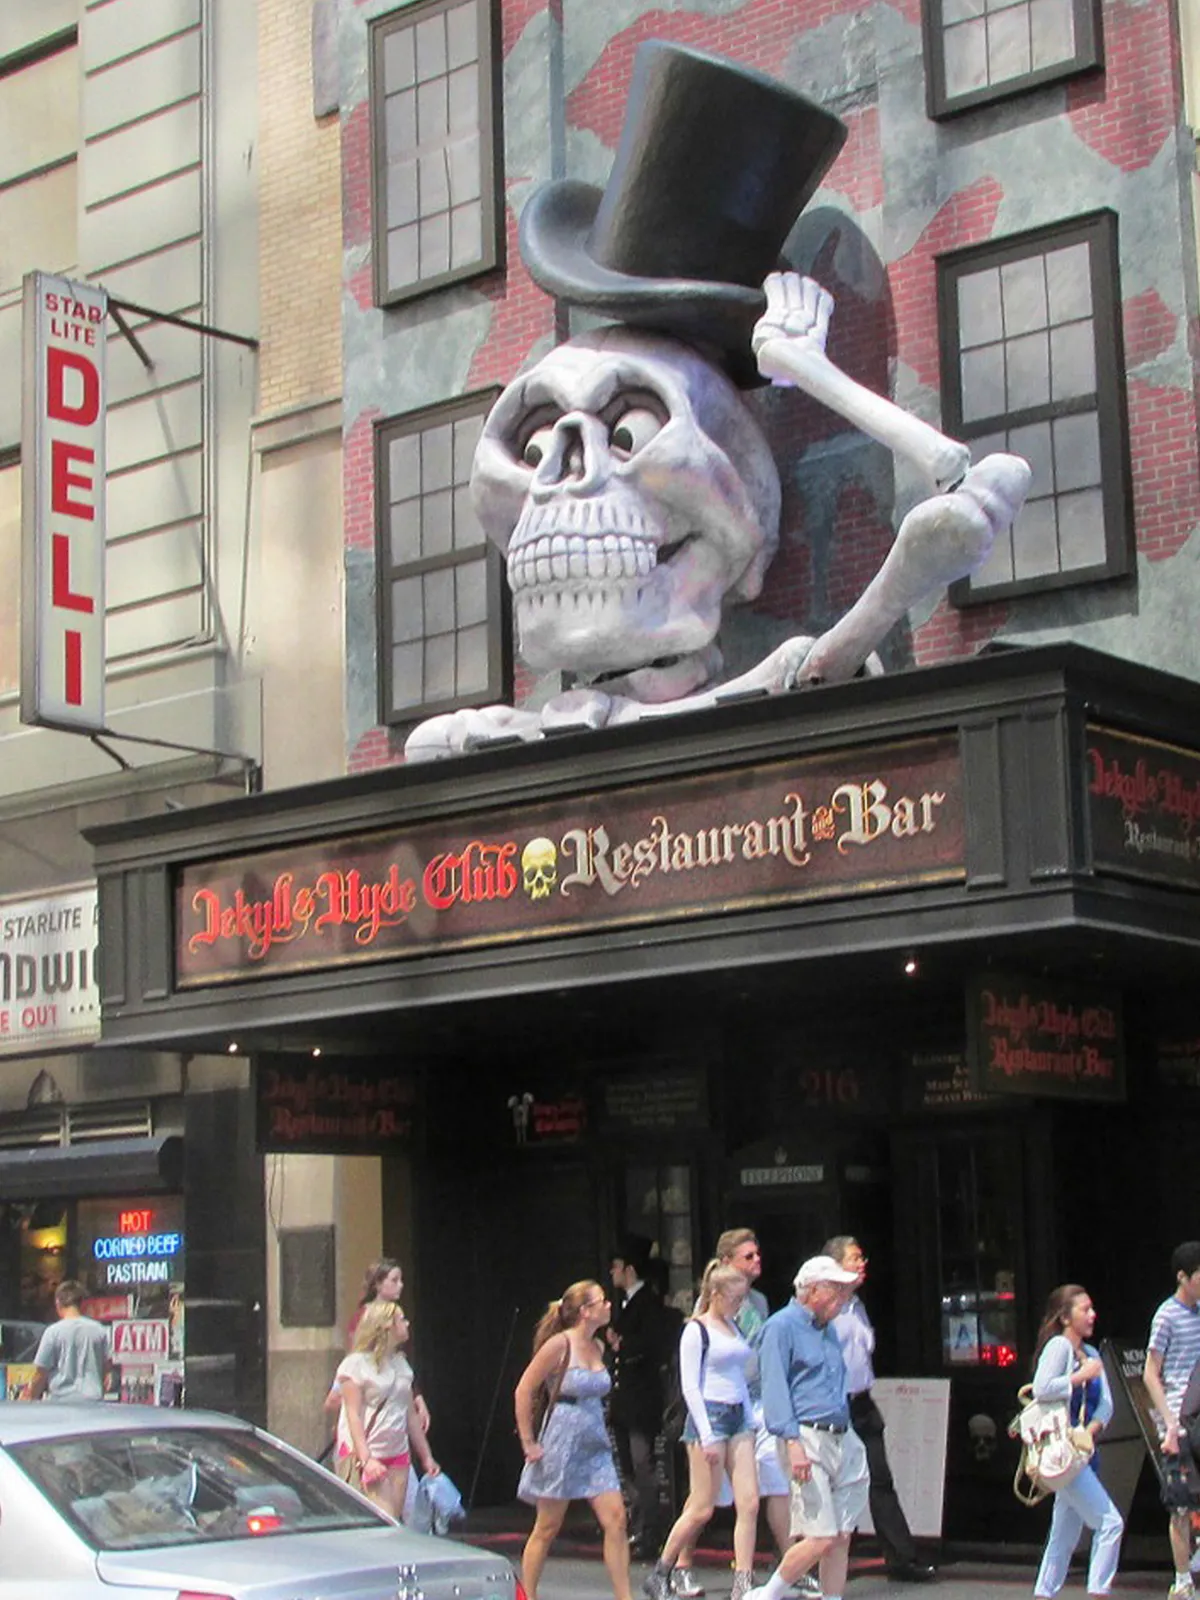 Jekyll & Hyde Club Restaurant and Bar sign with large skeleton tipping his top hat